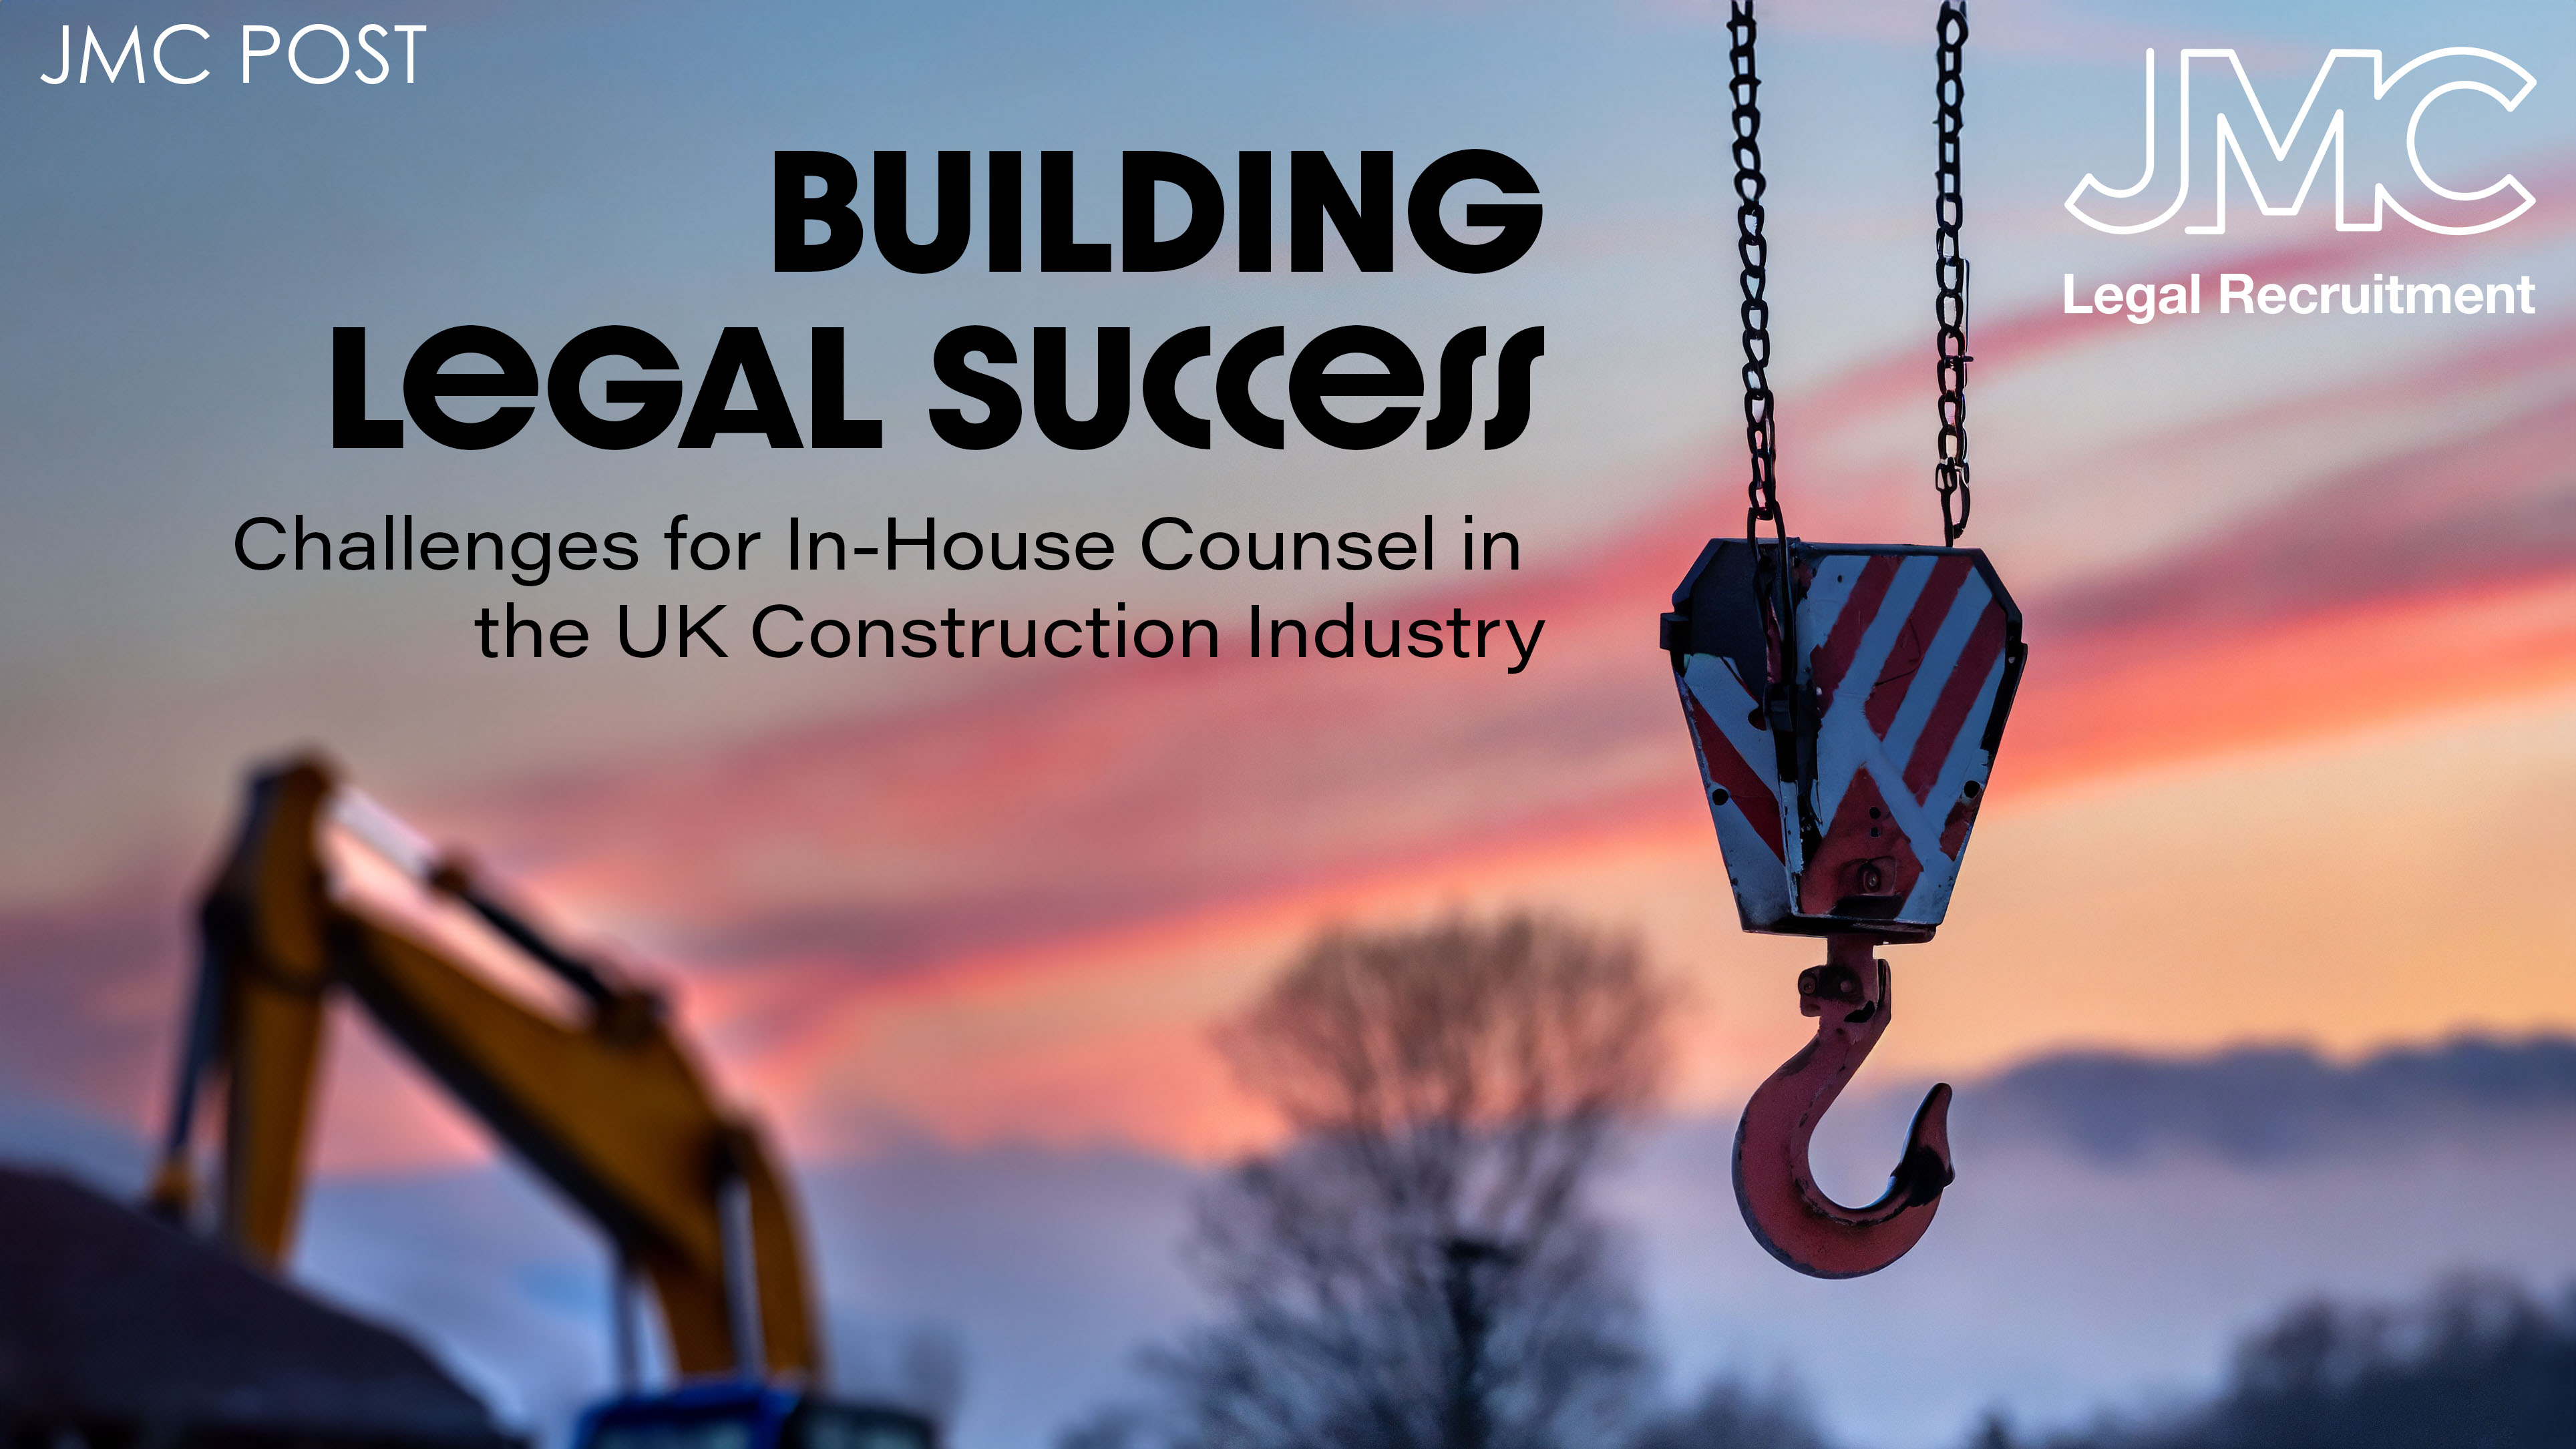 Challenges for In-House Counsel in the UK Construction Industry